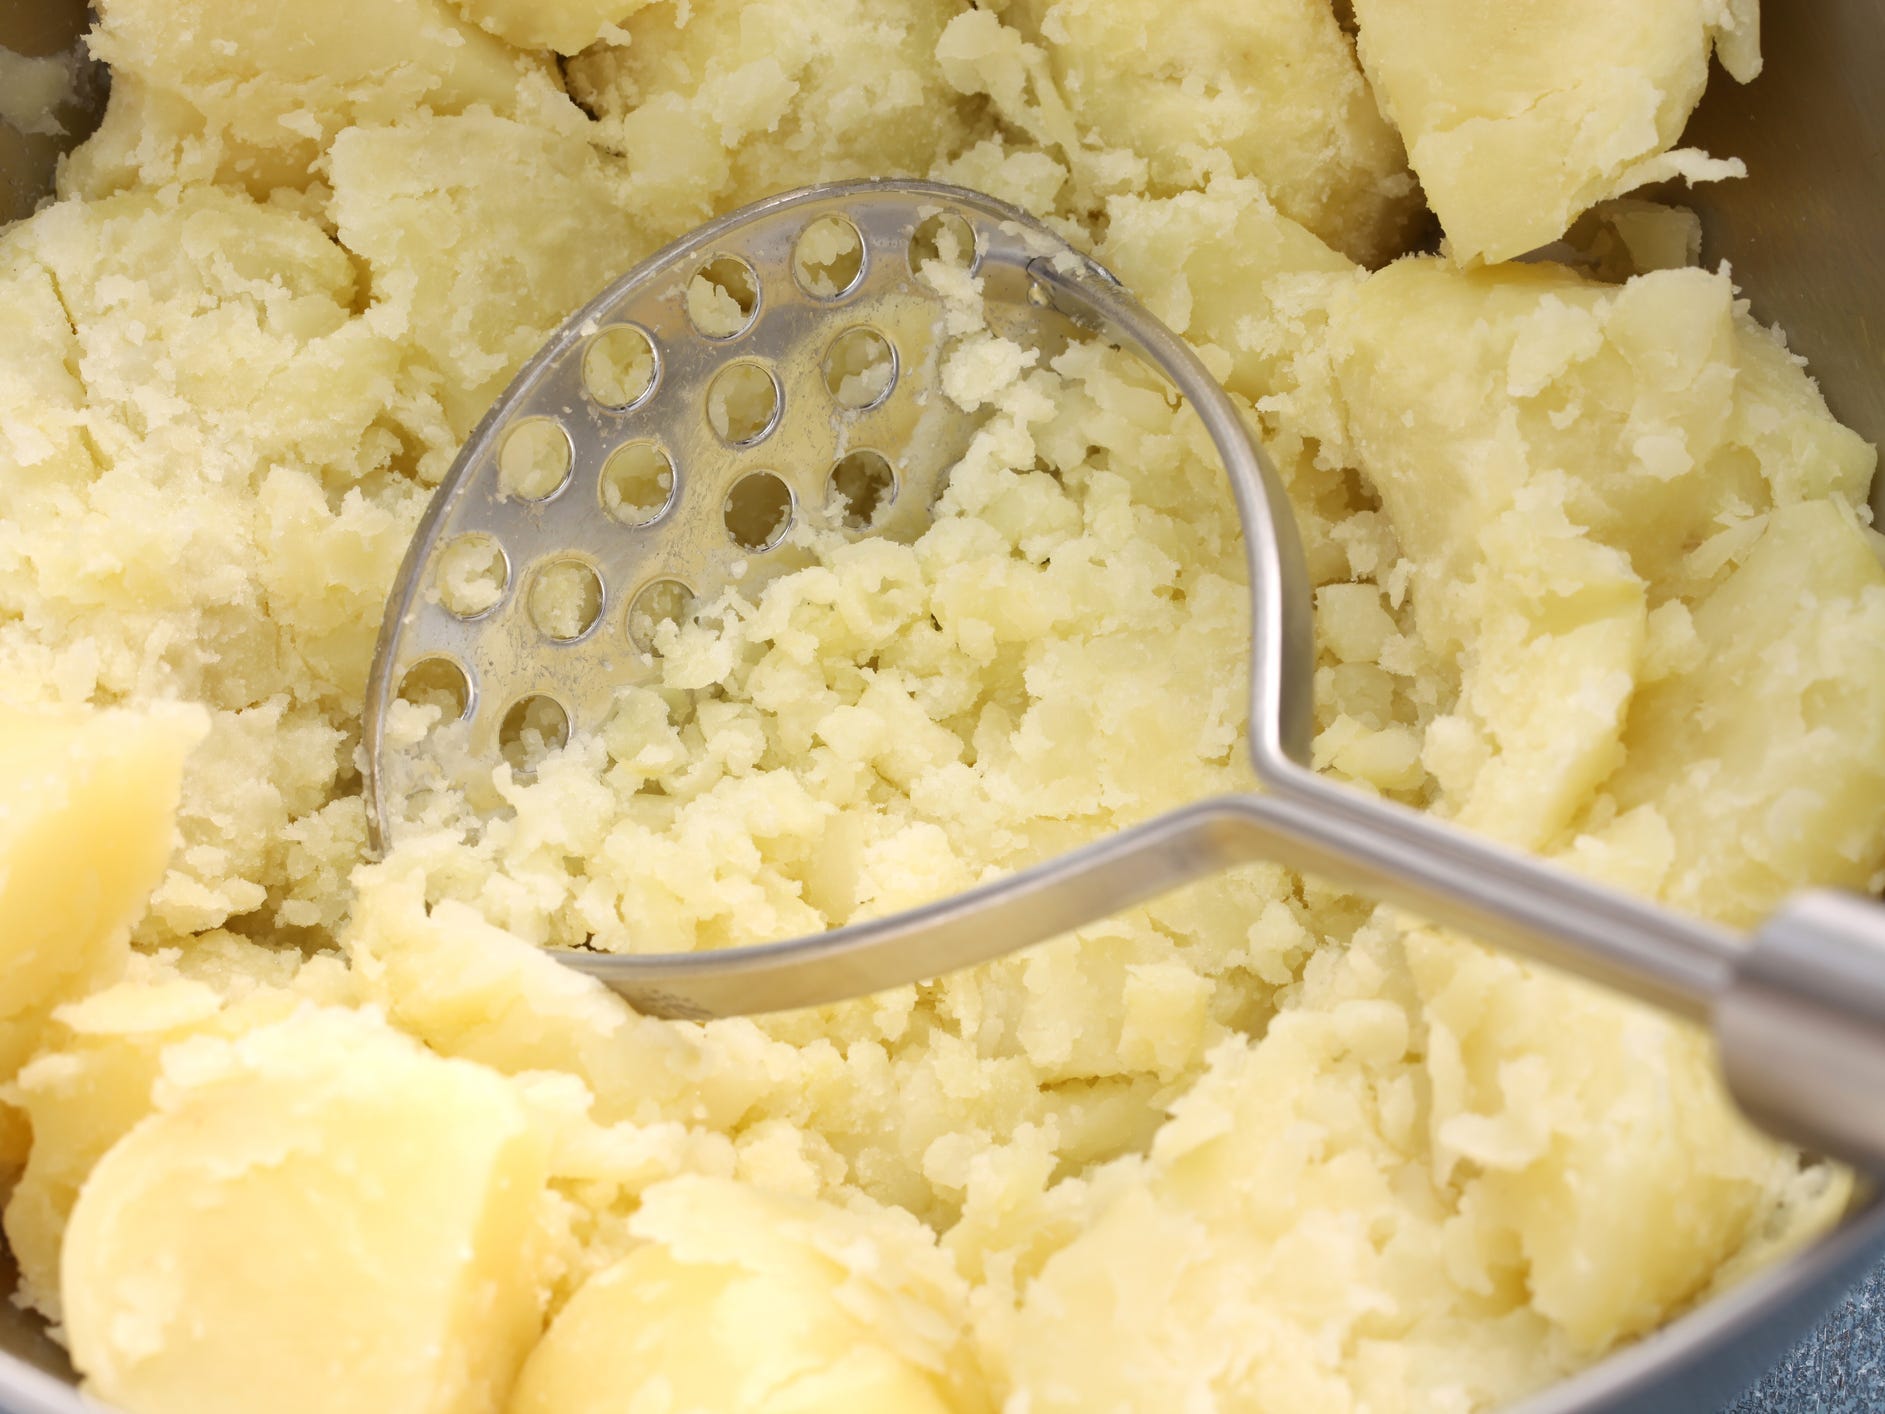 A pot of cooked potatoes being mashed with a potato masher